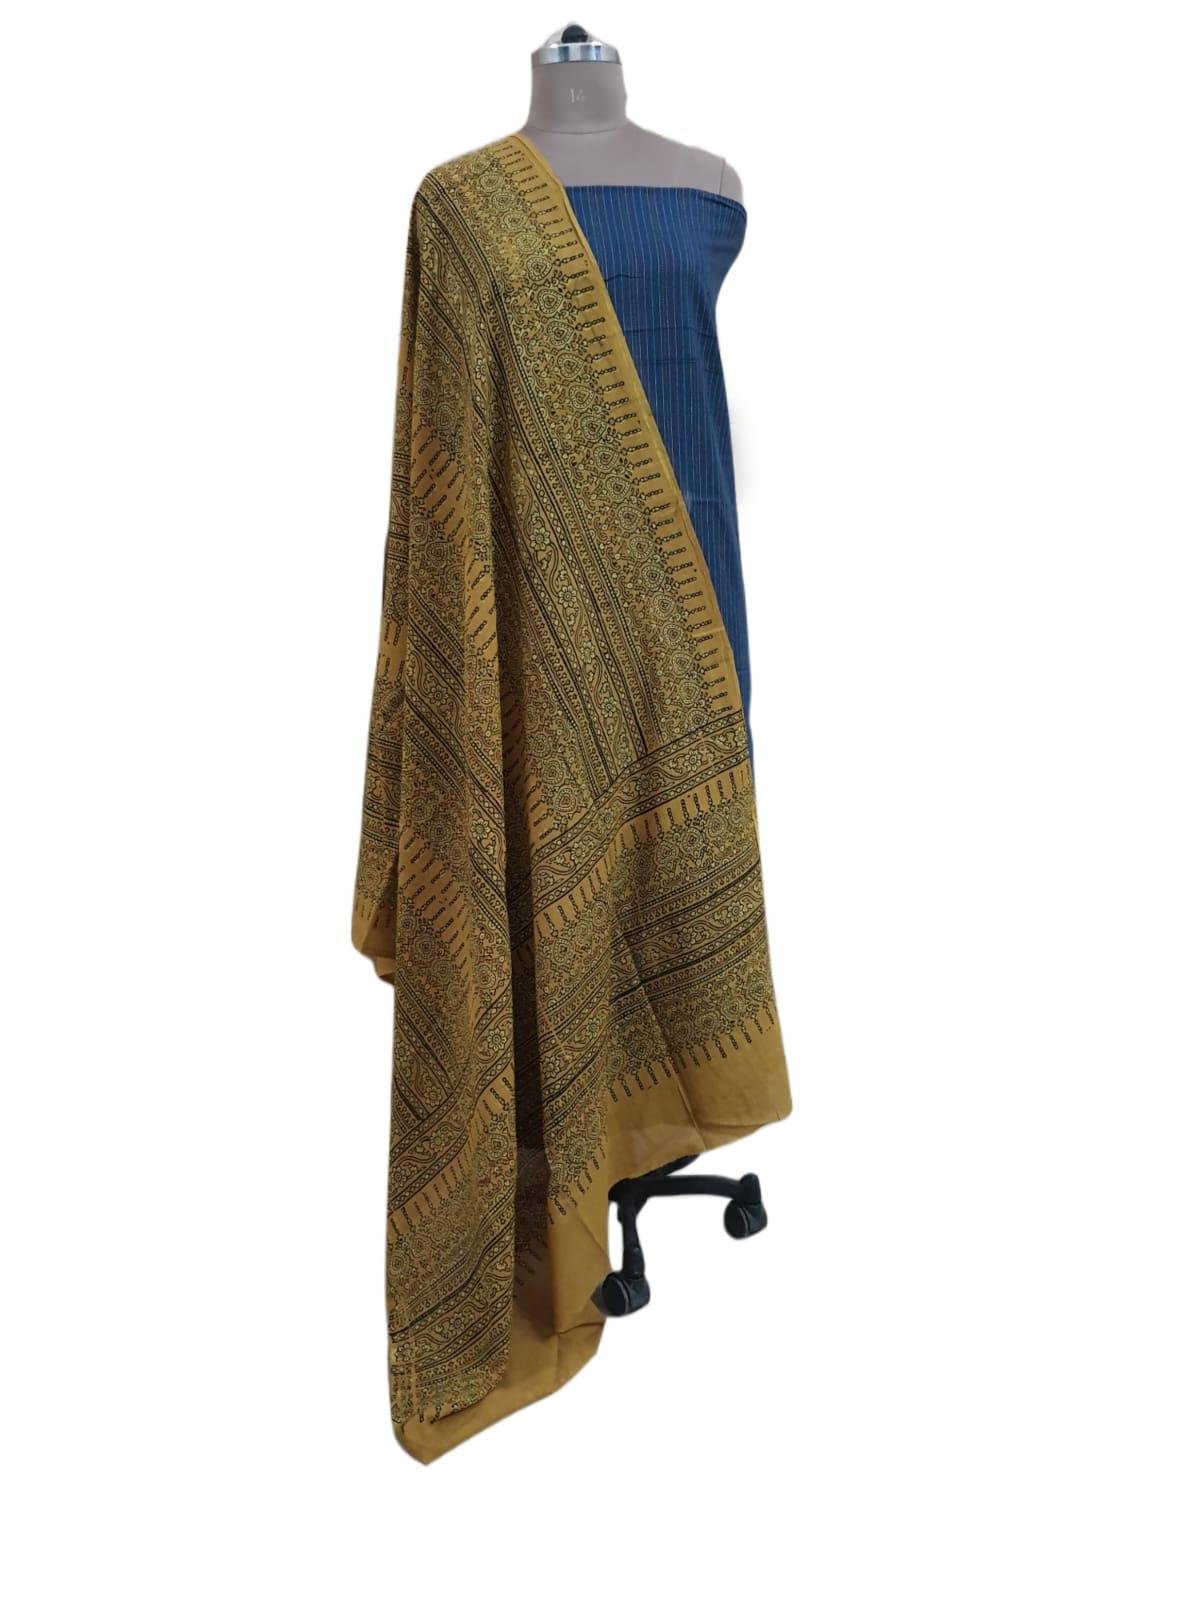 Blue Kantha Embroidered Kurta Top with Ajrakh Printed Dupatta AJK04 - Ethnic's By Anvi Creations